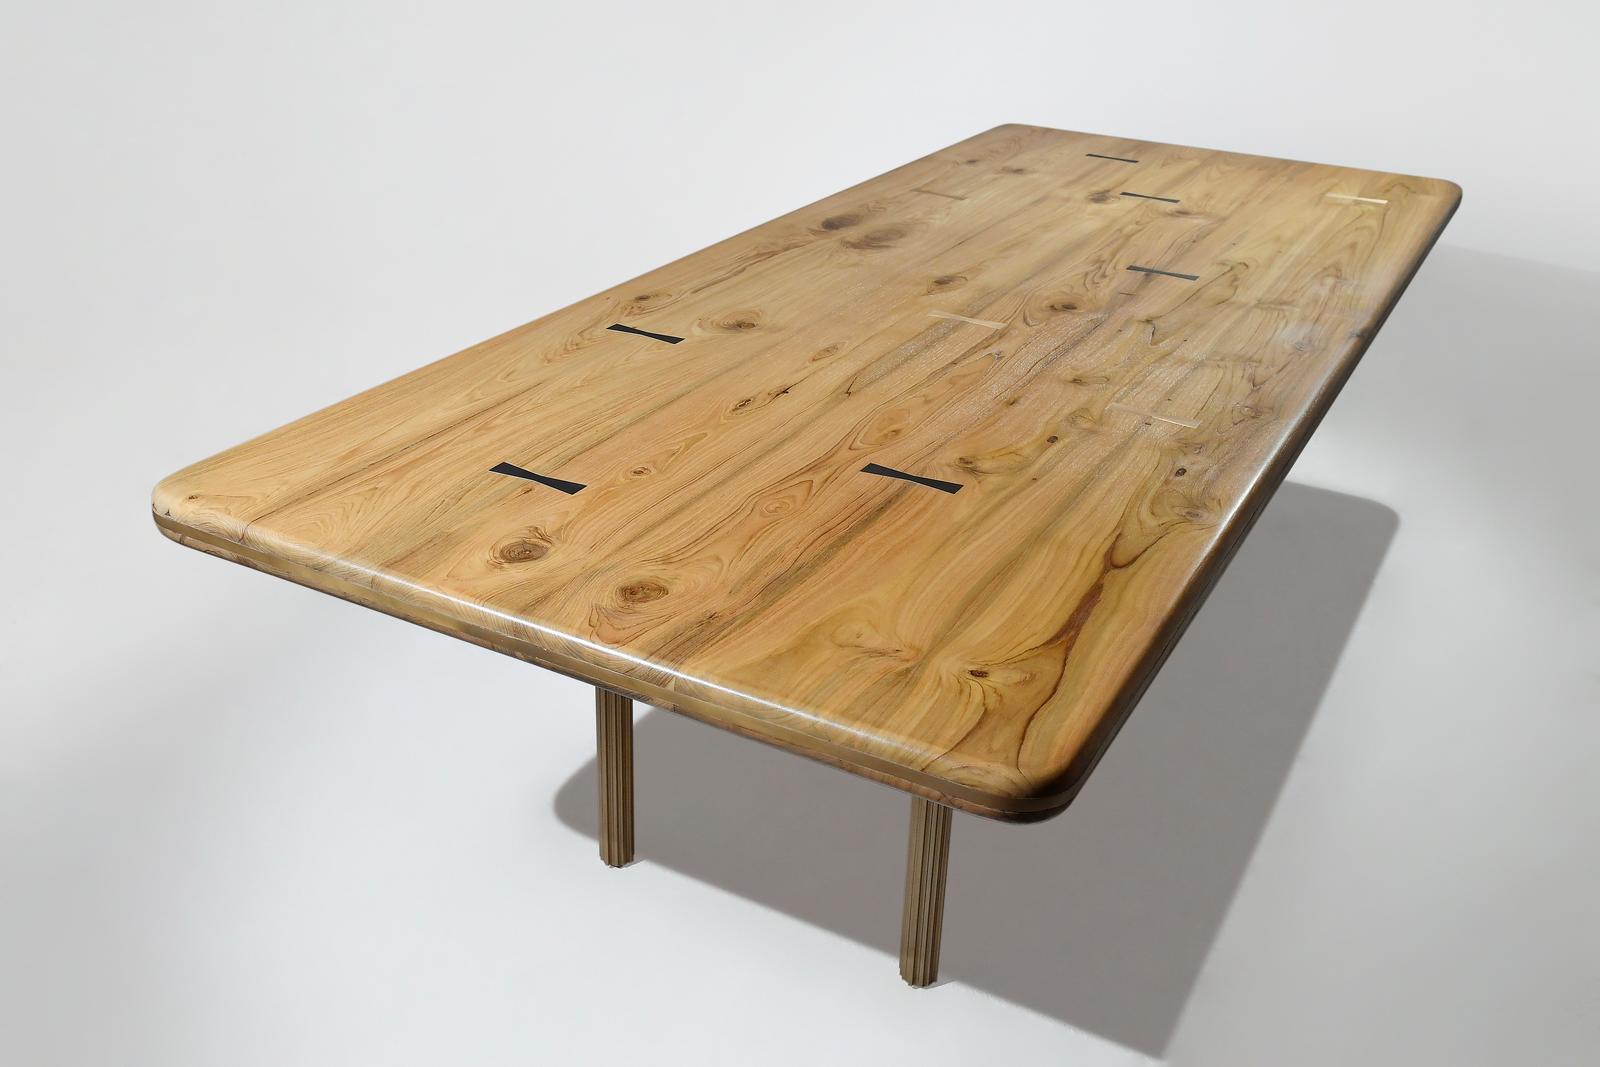 Hand-Crafted Bespoke Dining Table, Reclaimed Wood and Extruded Brass Base by P. Tendercool For Sale